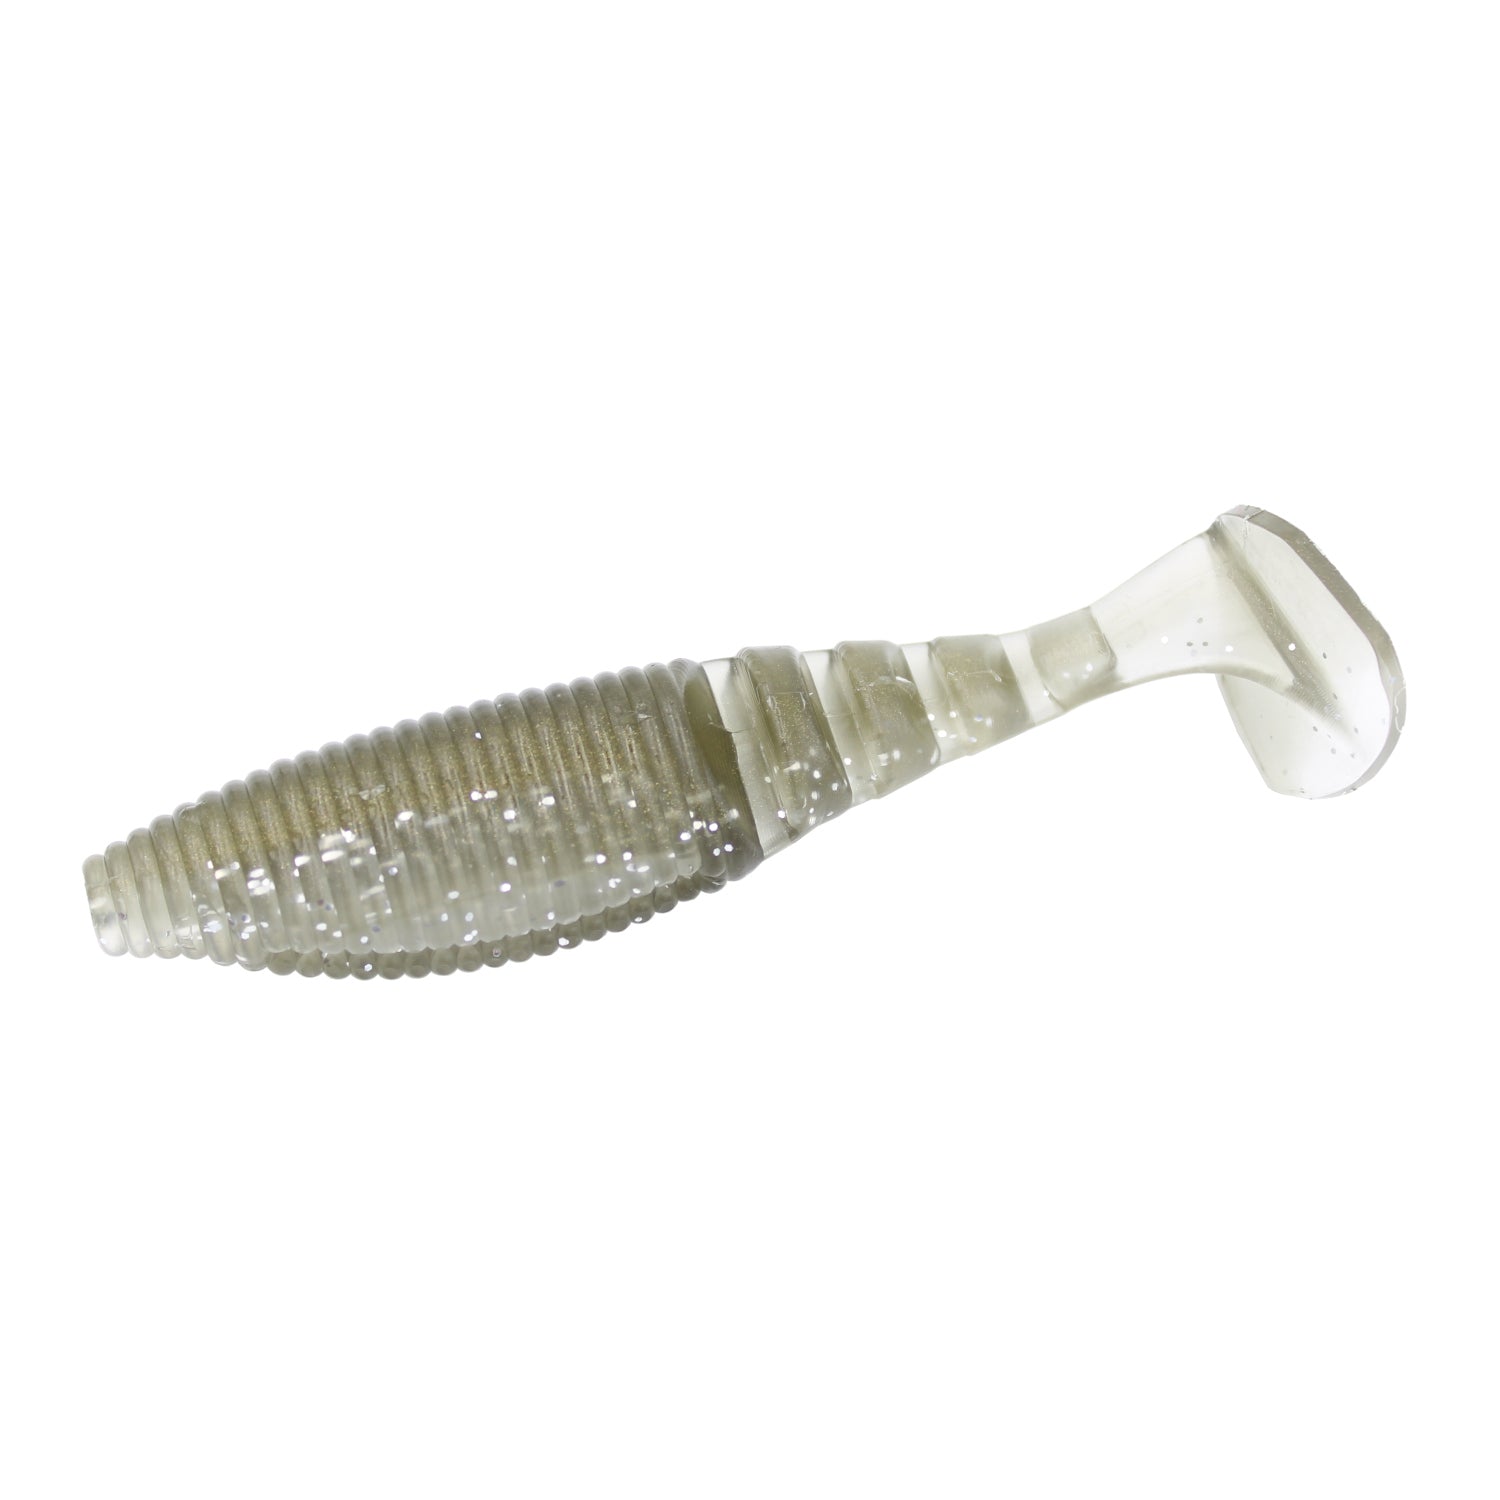 DAMIKI ANCHOVY SHAD PADDLETAIL